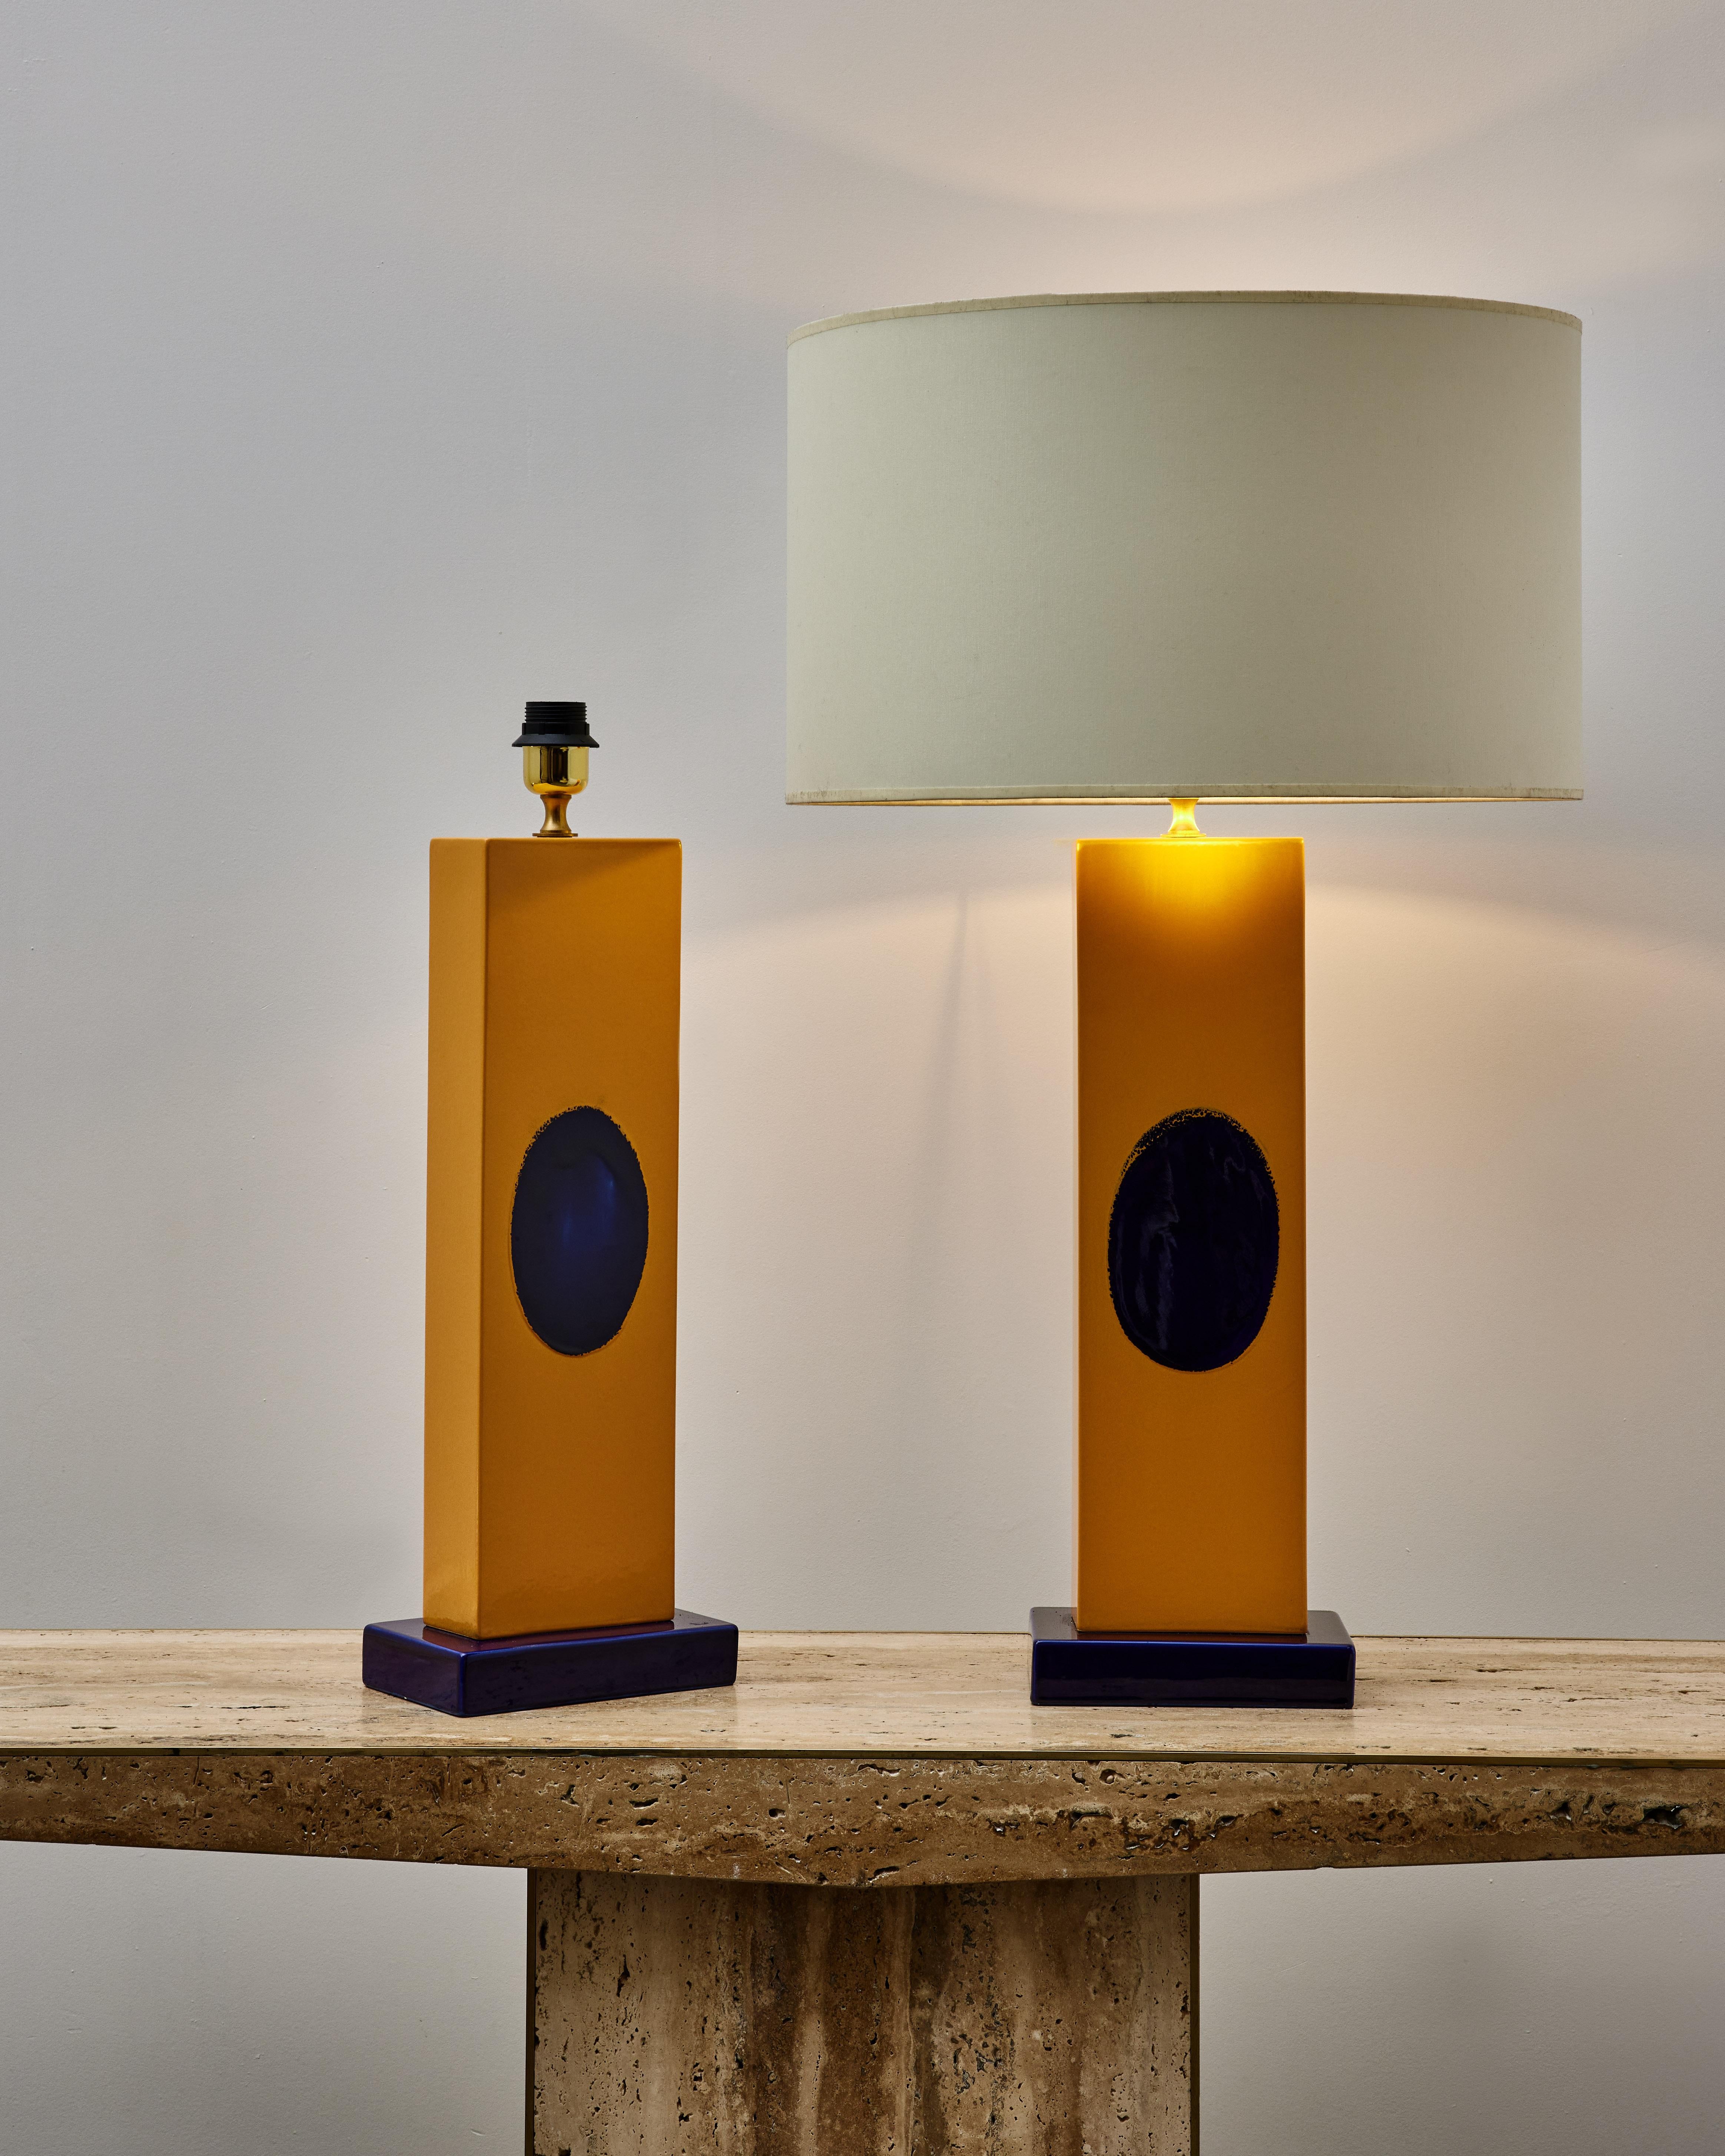 Elegant pair of vintage table lamps in painted ceramic.
Restored and rewired. 
Italy, 1980s.